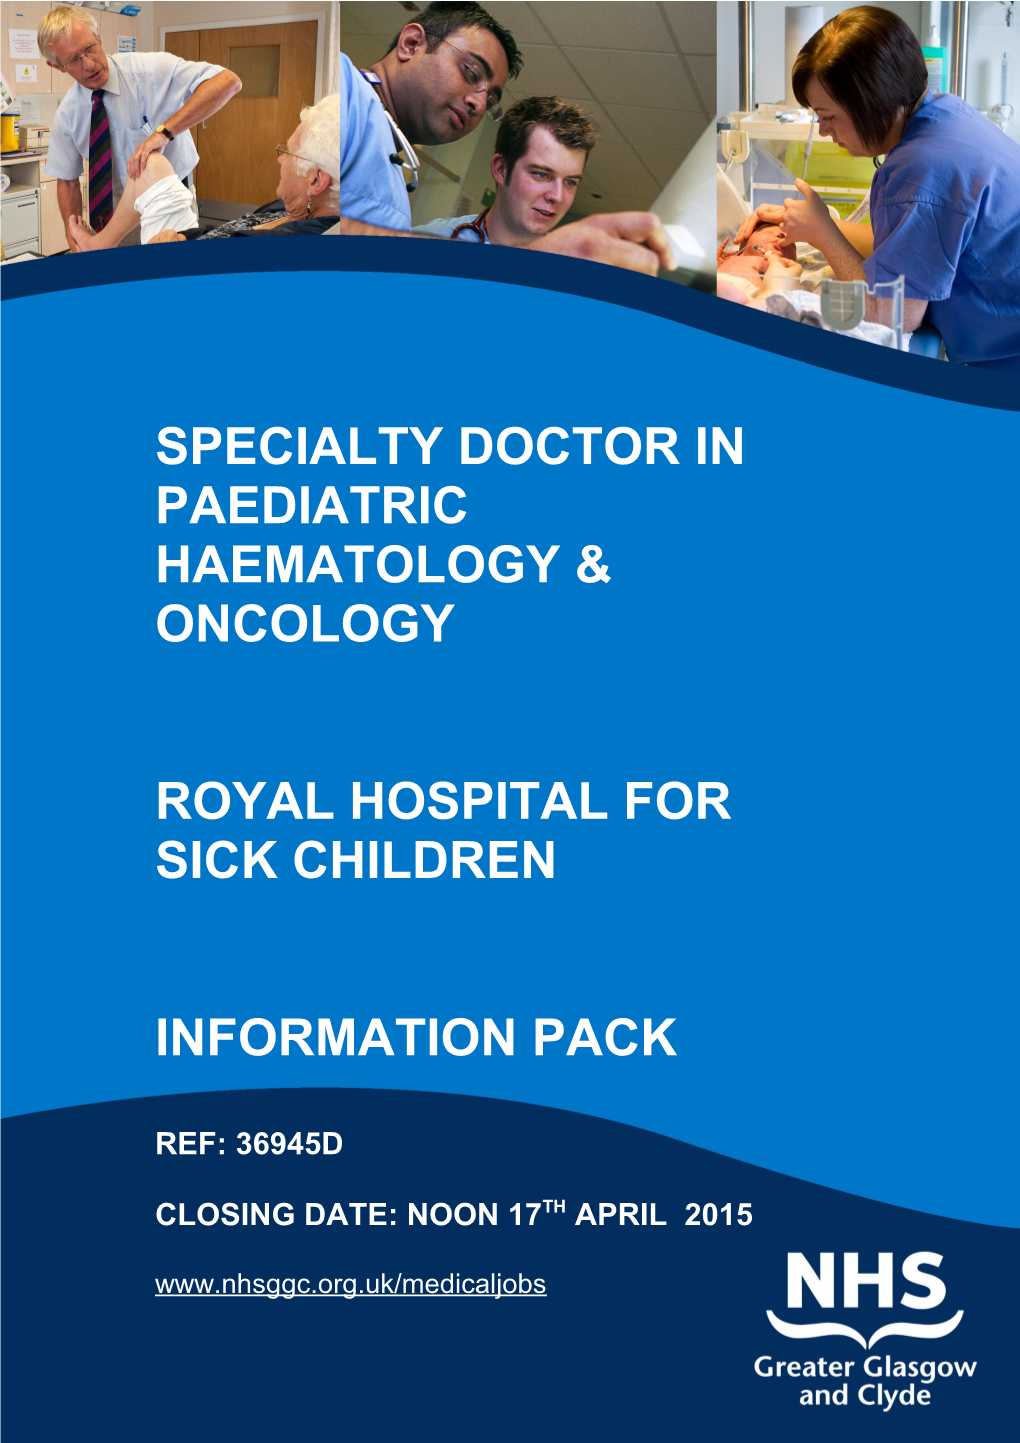 Specialty Doctor in Paediatrichaematology & Oncology